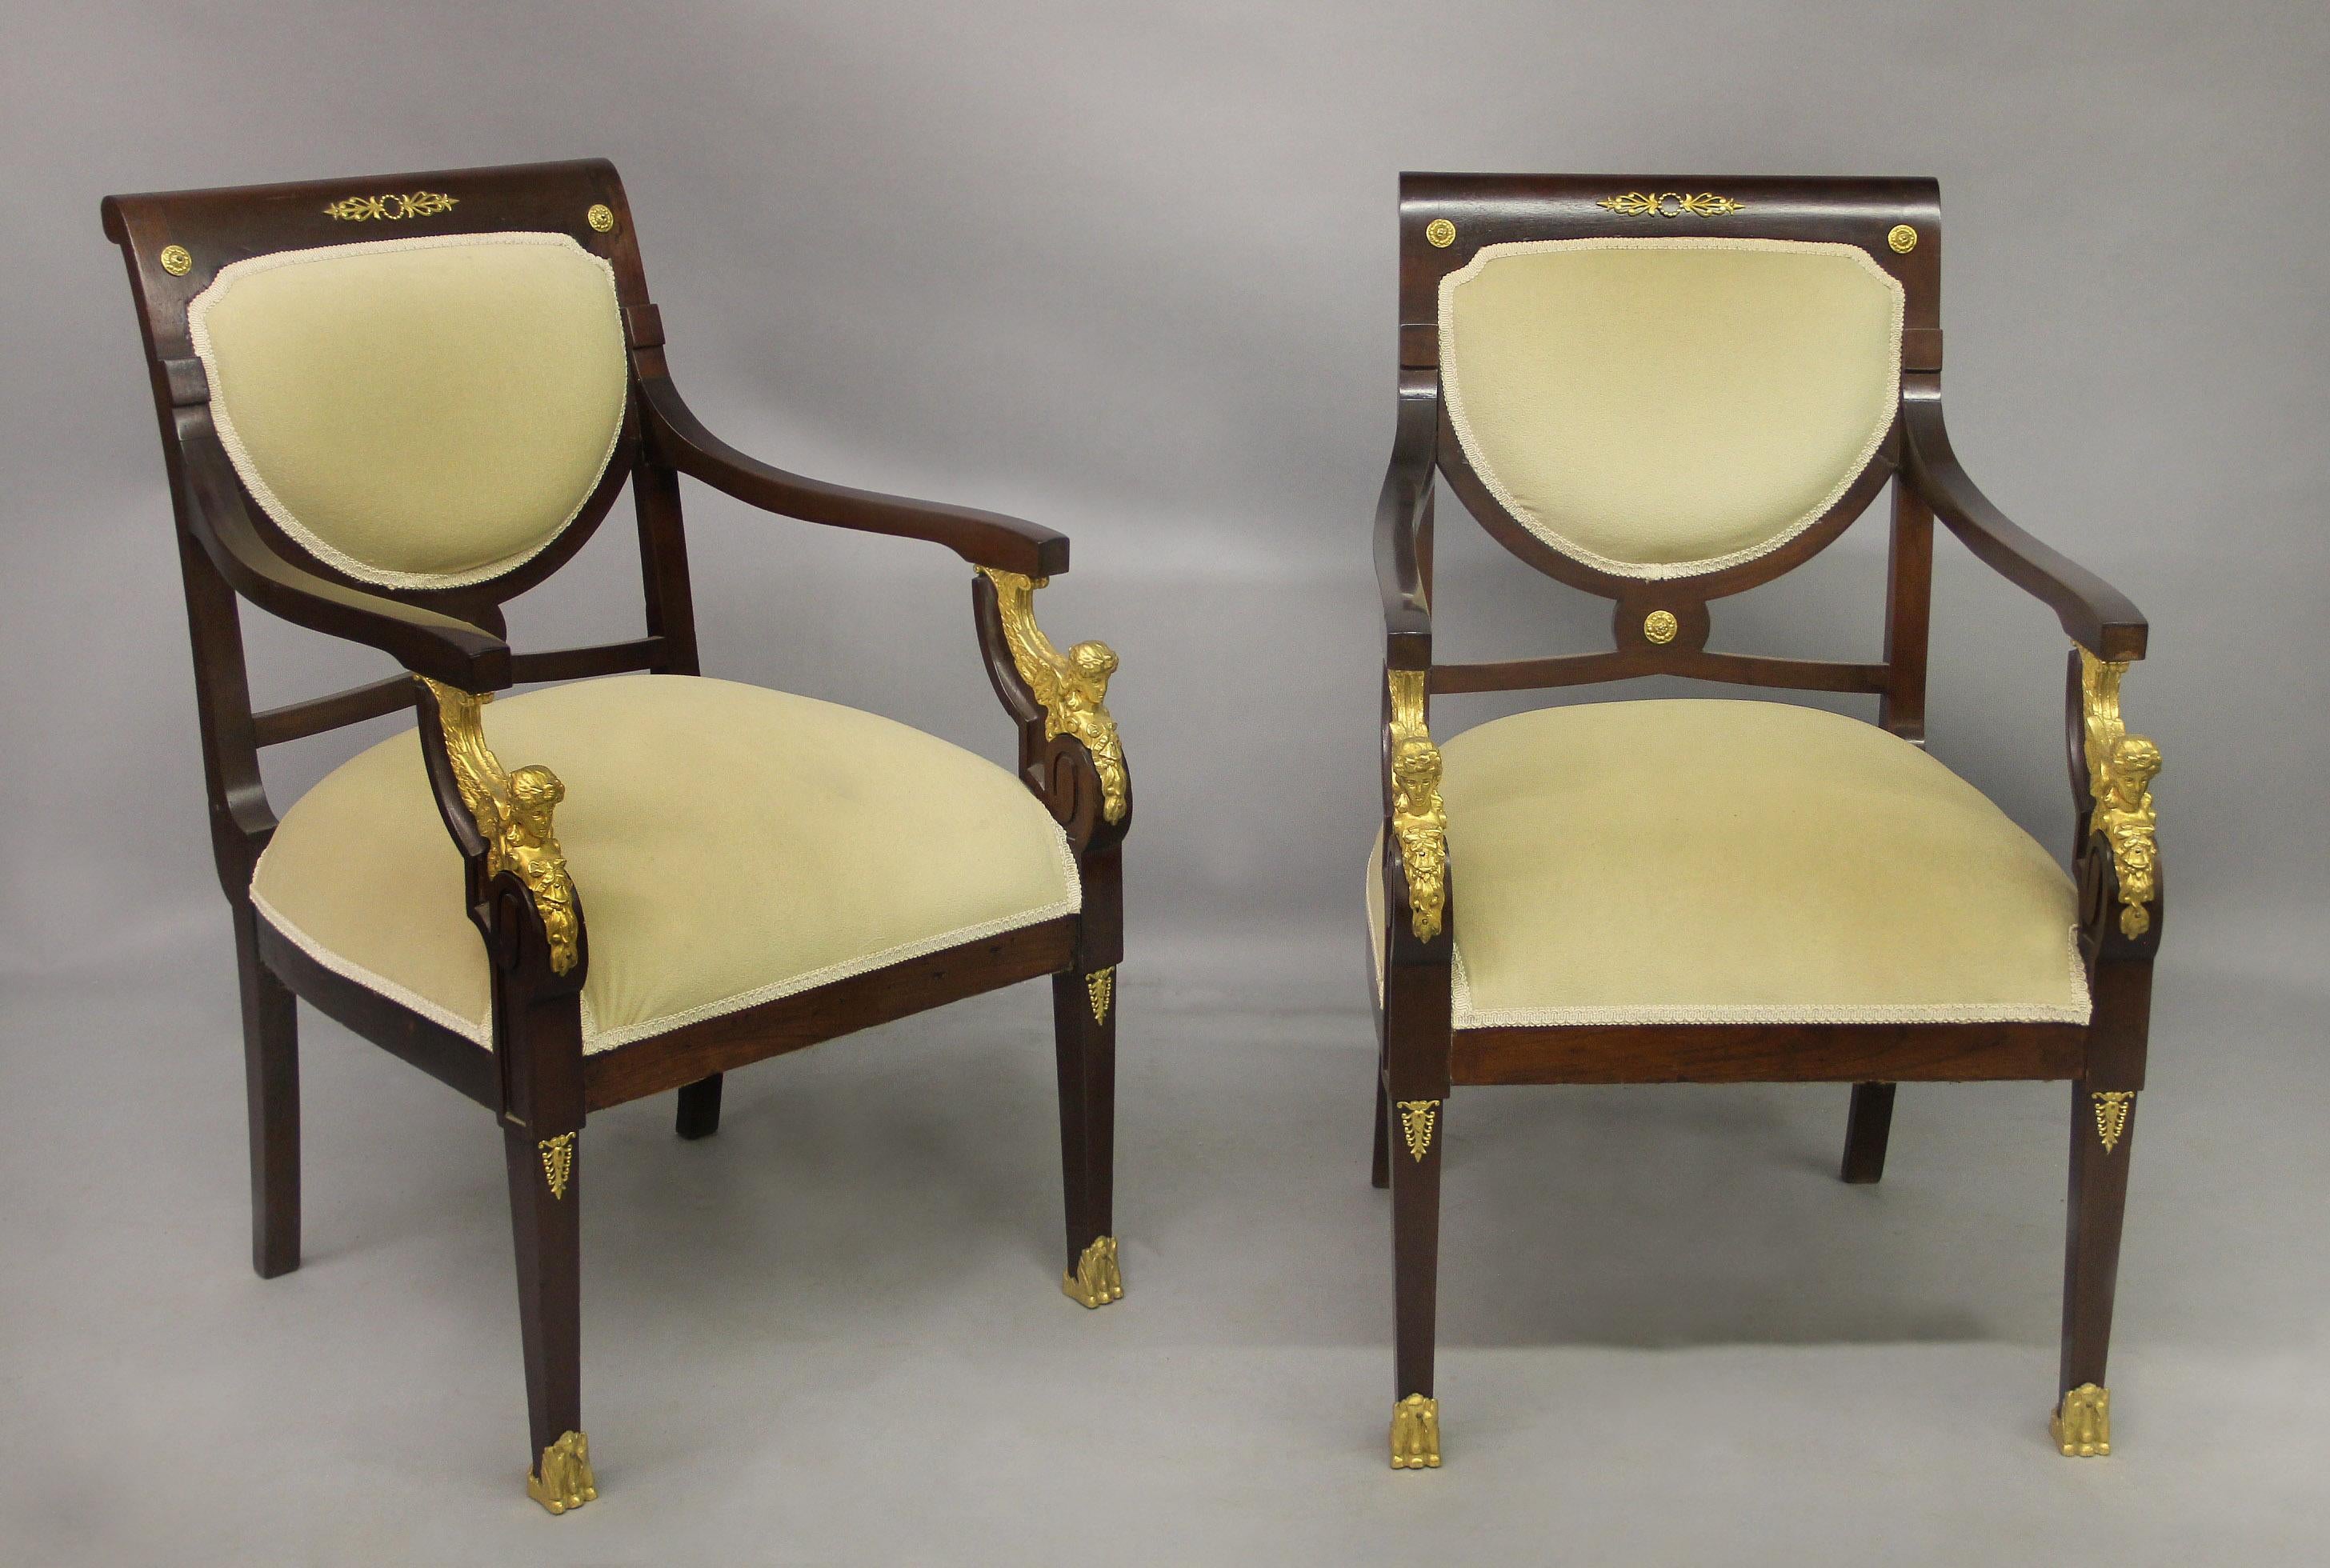 early 20th century furniture styles